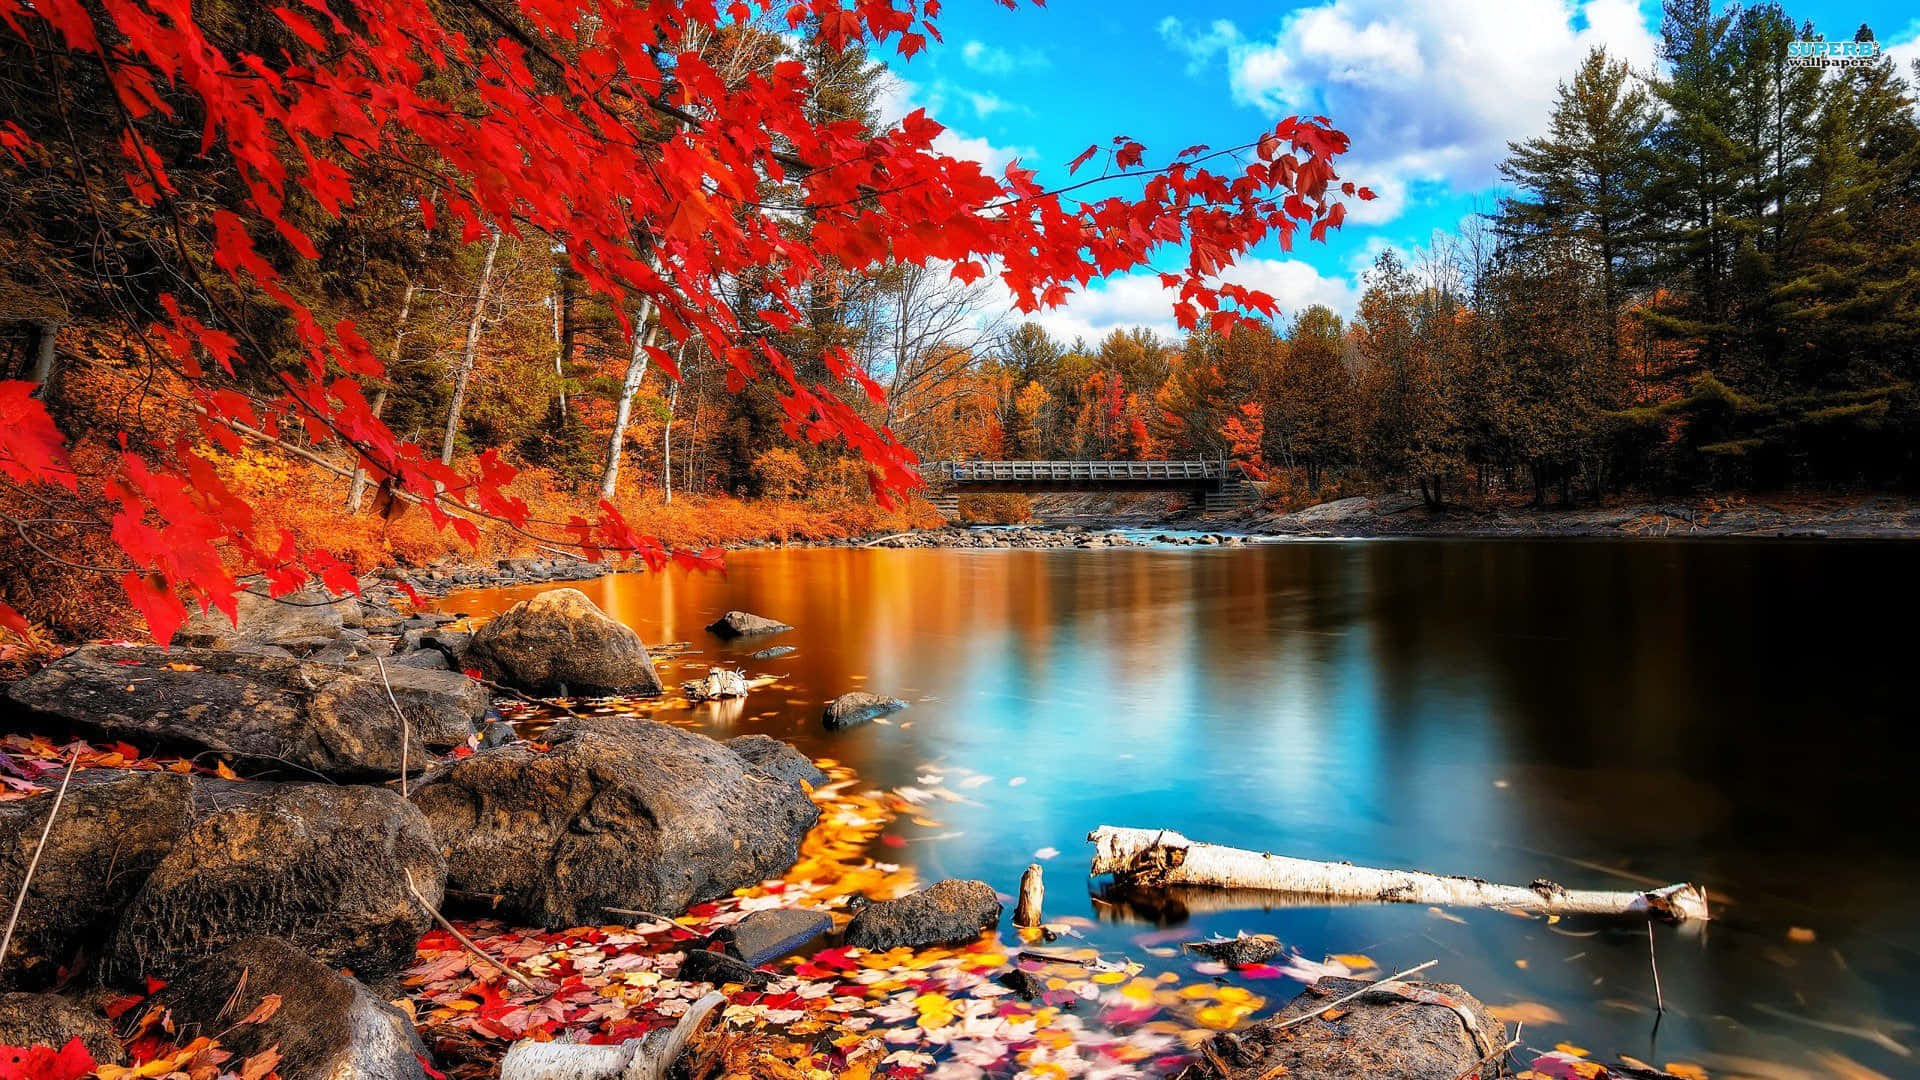 Caption: Charming Fall Town Scene in Vibrant Colors Wallpaper